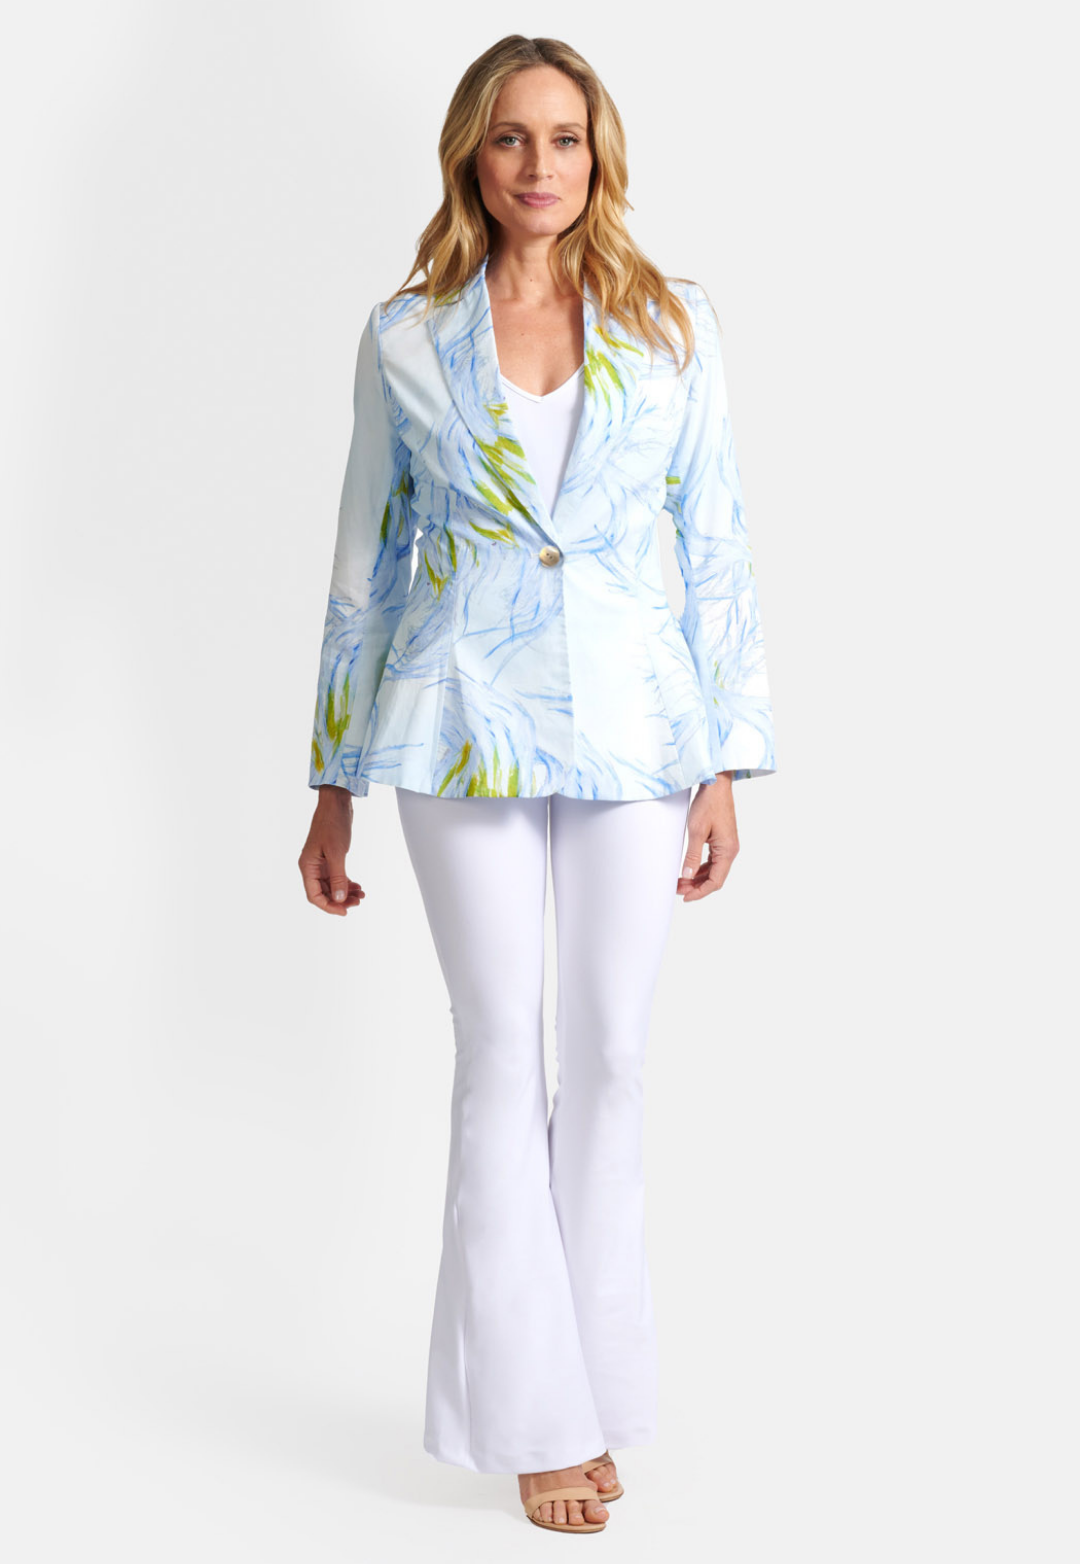 woman wearing blue and yellow feather printed cotton blazer by Ala von Auersperg